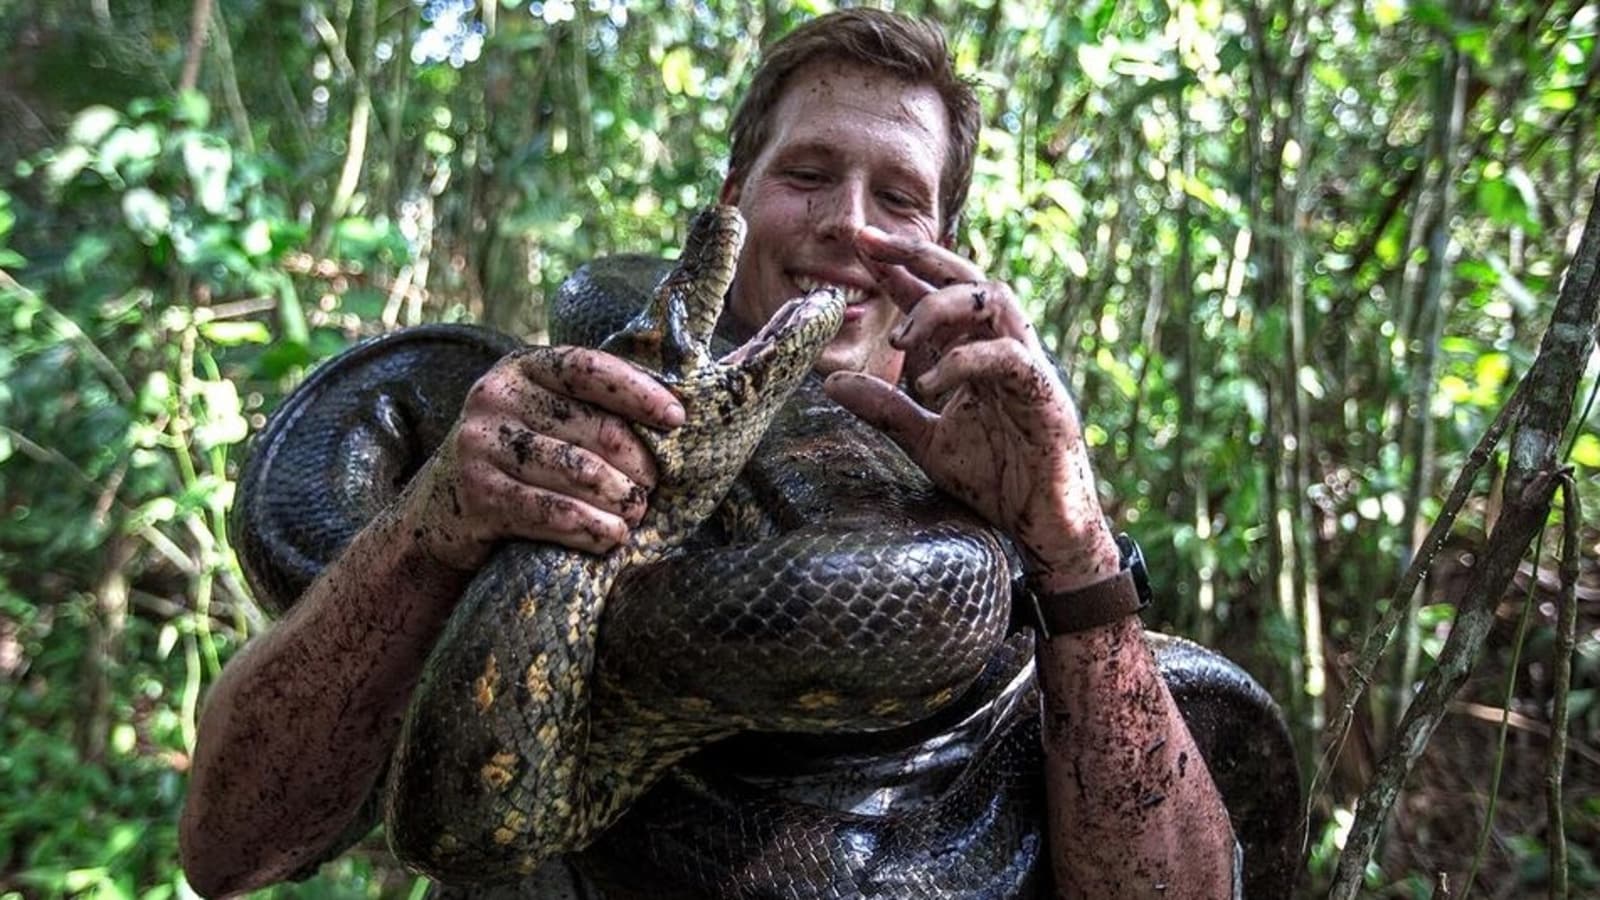 ‘World’s biggest snake’ discovered in Amazon; 26-feet long, weighs 200 kg- Video